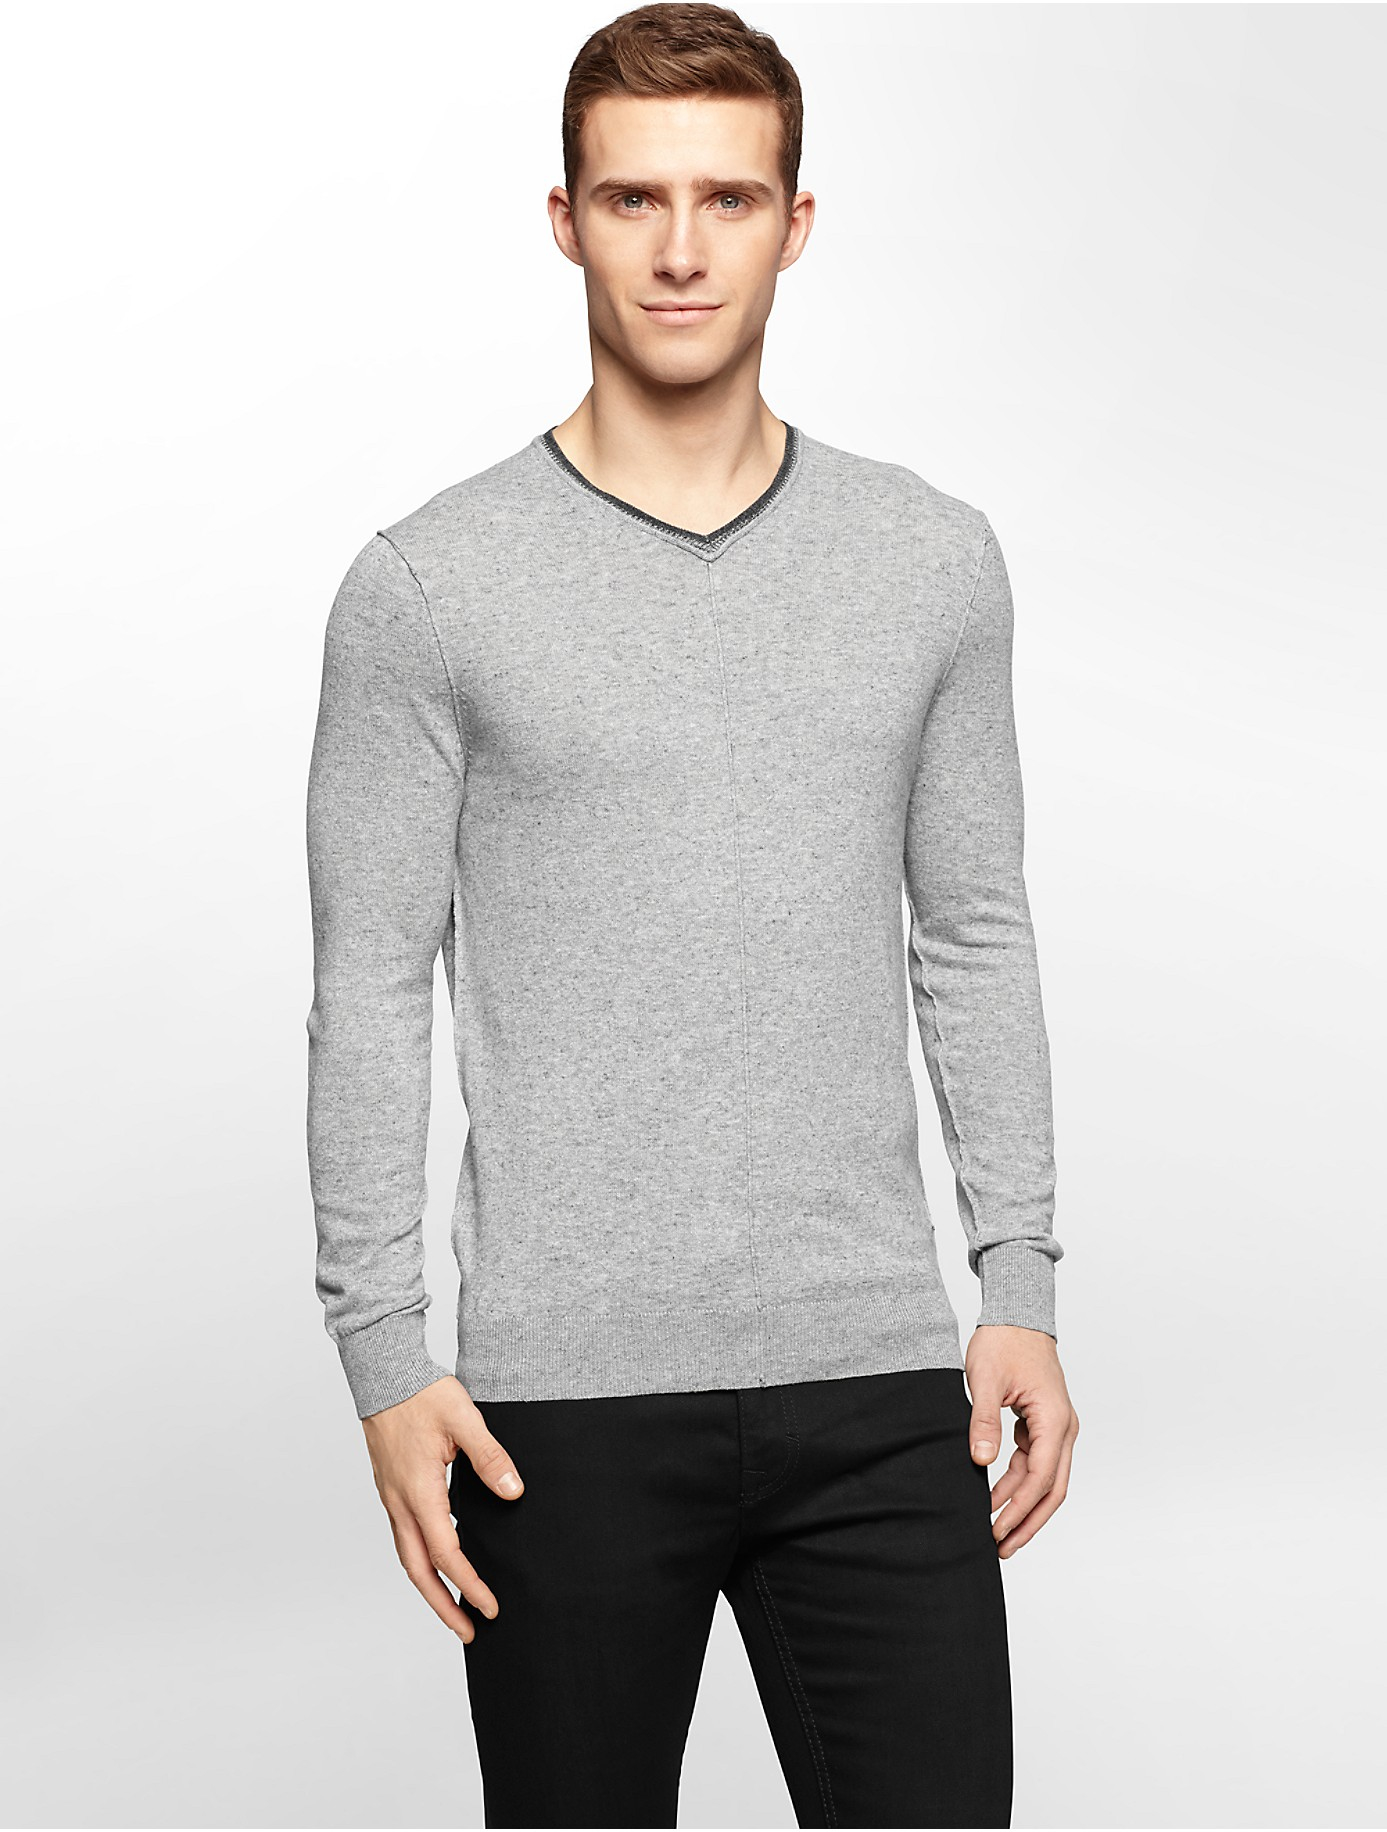 Lyst - Calvin Klein Jeans Marble Heathered V-neck Sweater in Gray